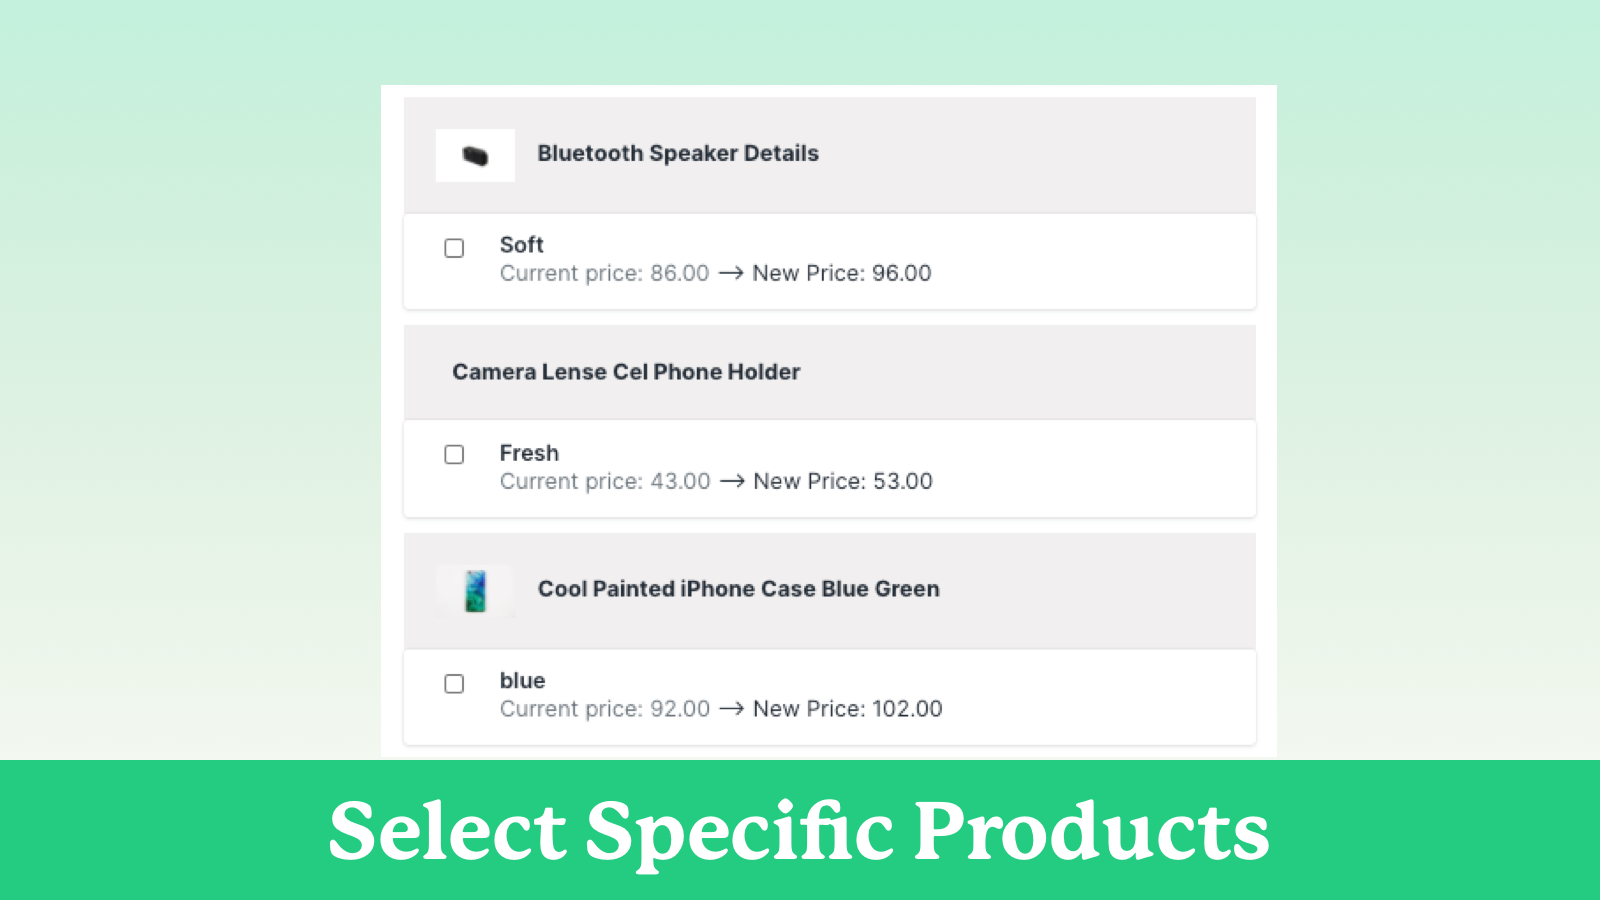 Select your products